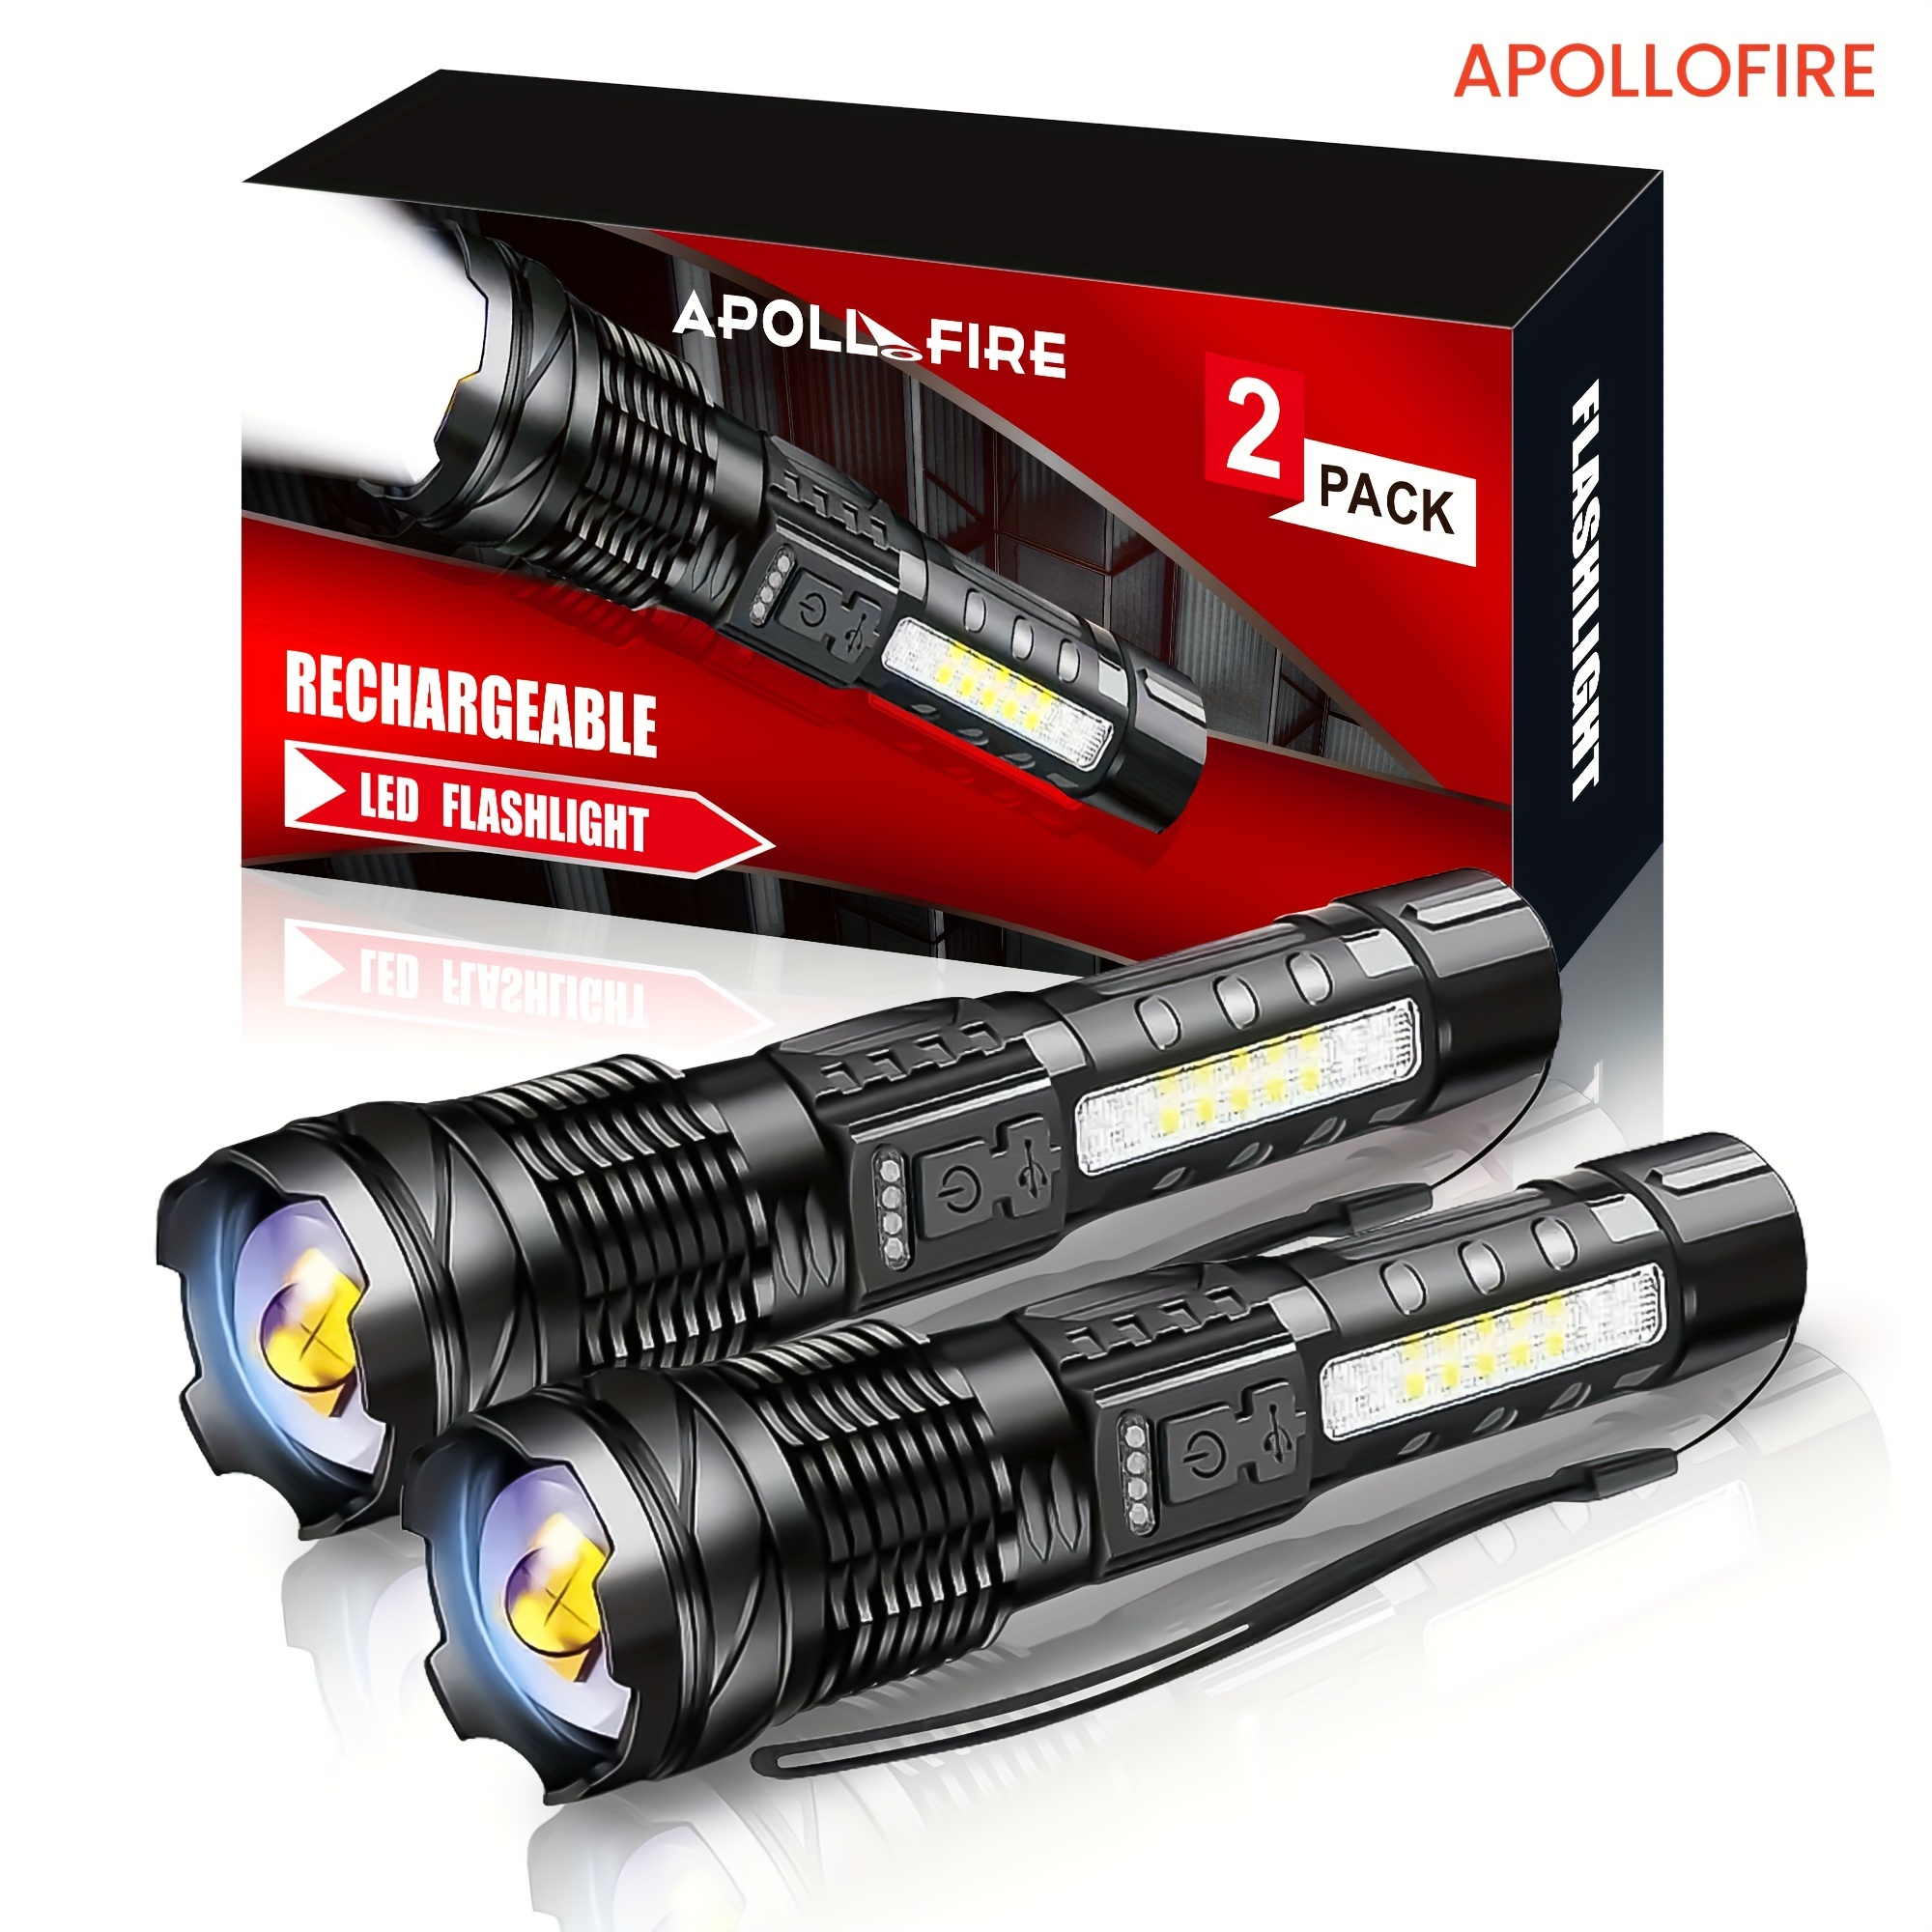 

Apollofire 2pcs Led Rechargeable Zoom Flashlights, Powerful, Portable & Durable Led Light For Outdoor Hiking Camping